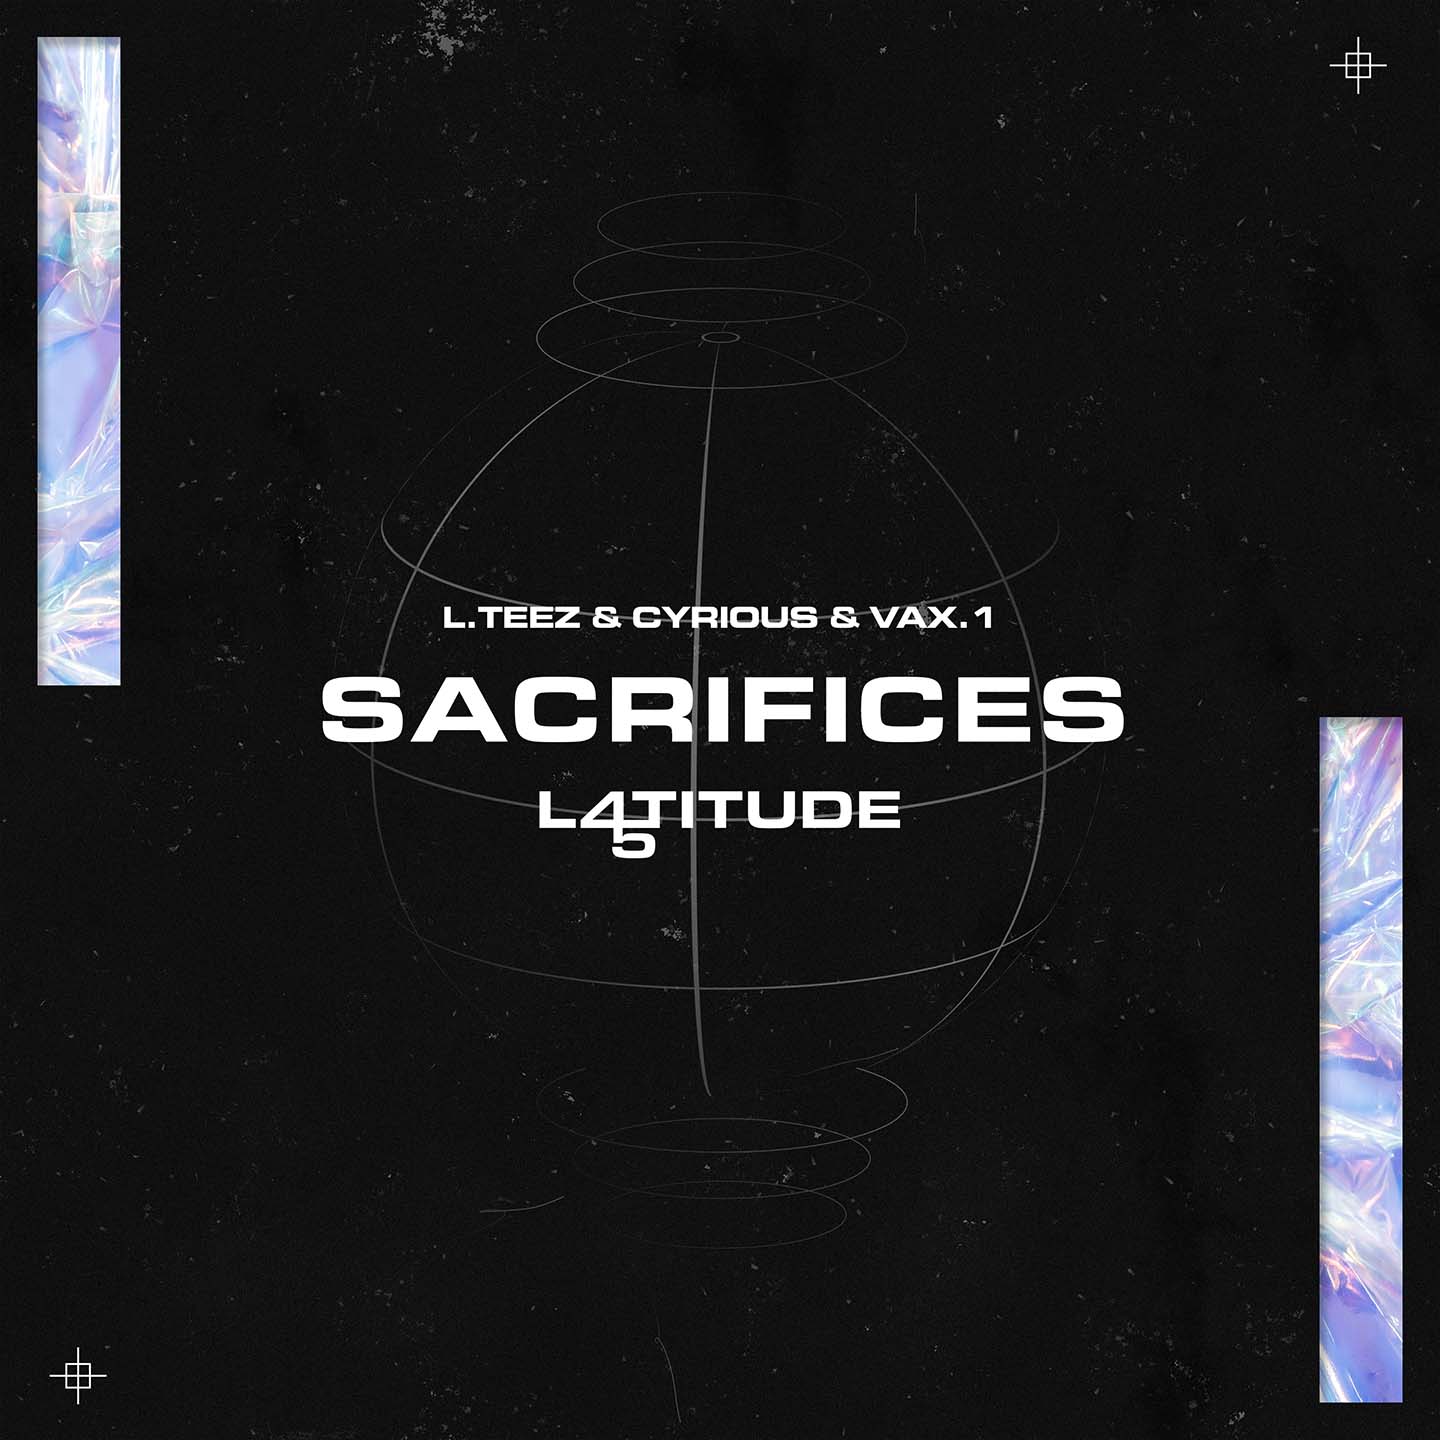 Sacrifices, first single from Latitude 45 !